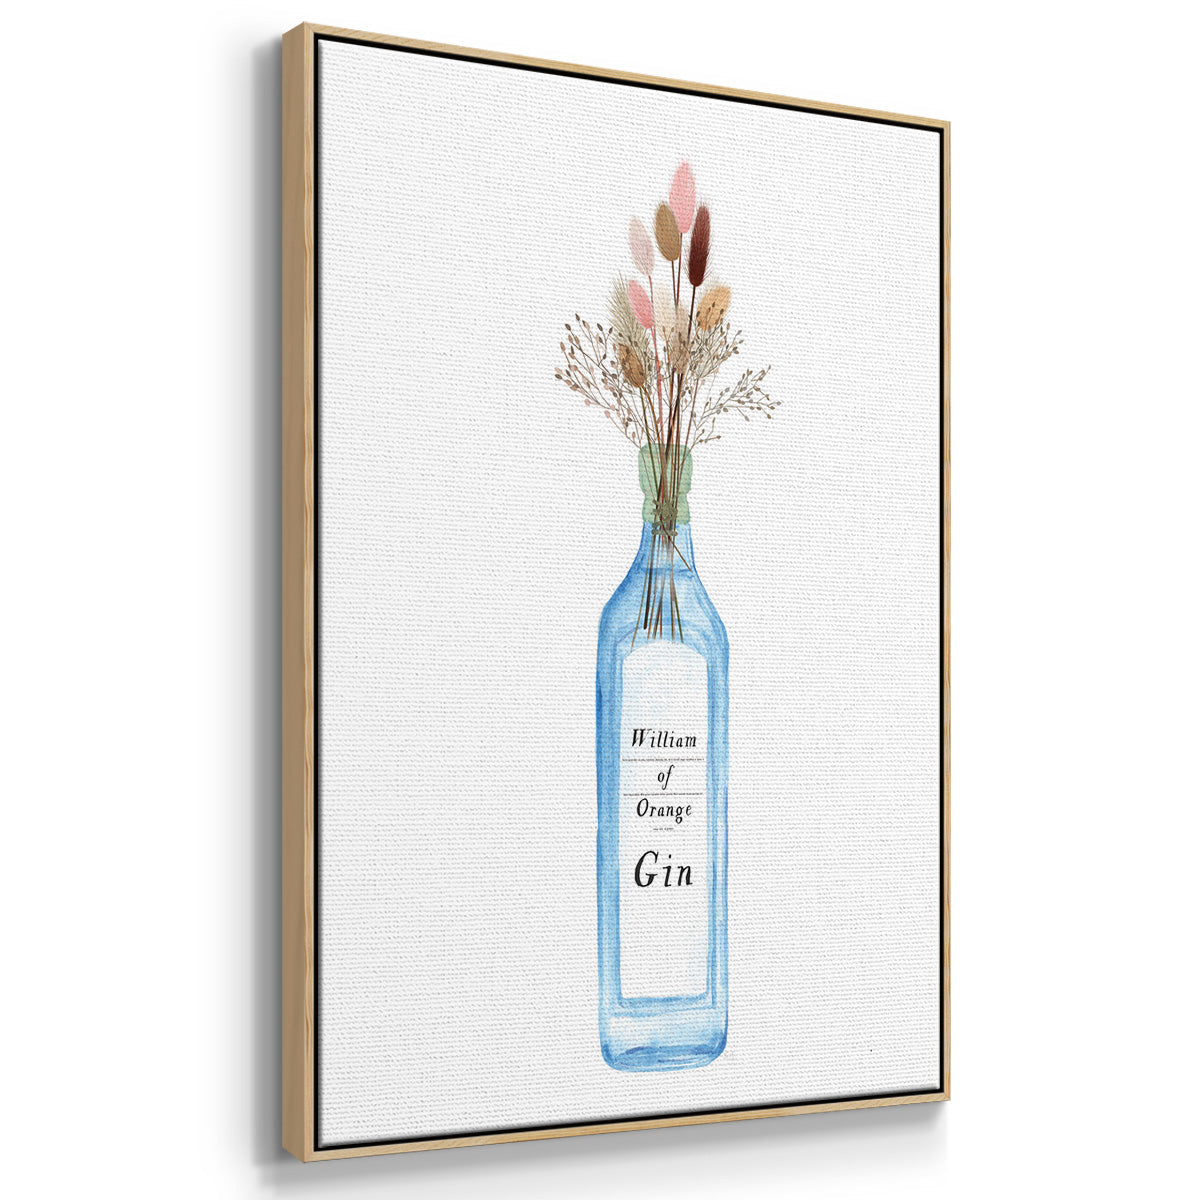 Frost Valley Vodka - Framed Premium Gallery Wrapped Canvas L Frame 3 Piece Set - Ready to Hang